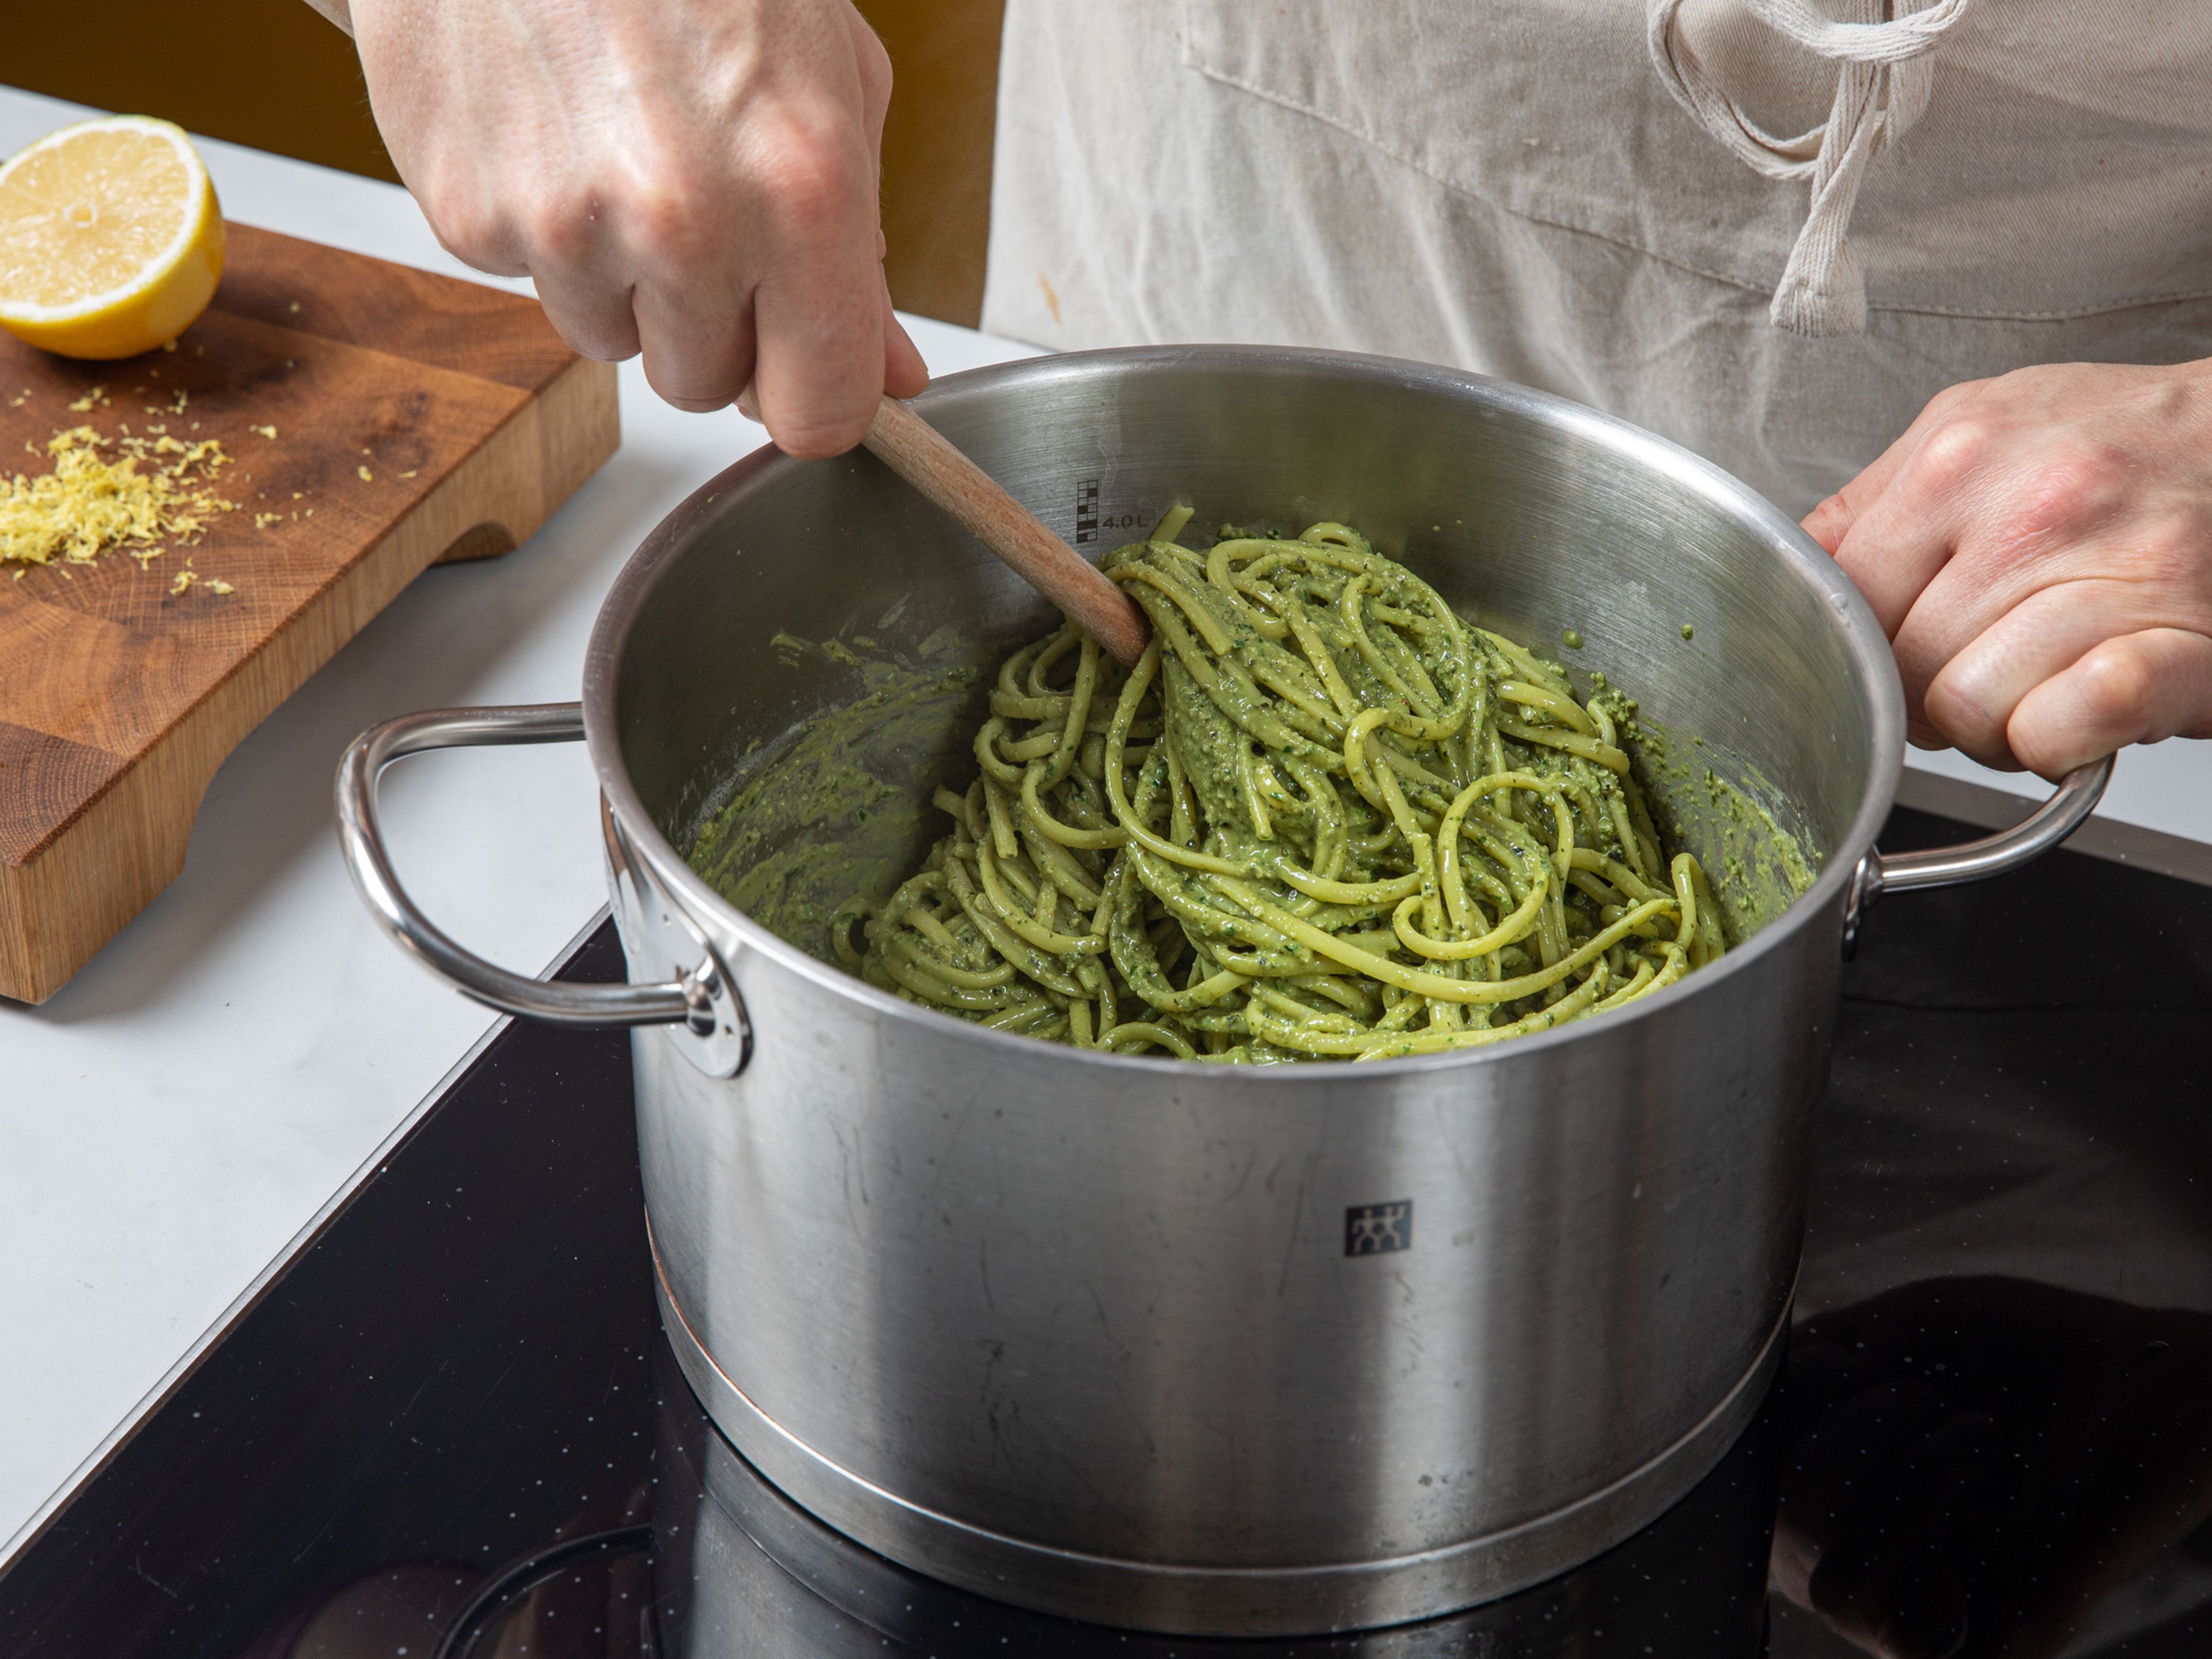 Add the pesto to the drained pasta and toss well. Add pasta water, heat briefly and toss through. The pesto should be thick and creamy. Garnish with some additional lemon zest and pumpkin seeds. Enjoy your meal!